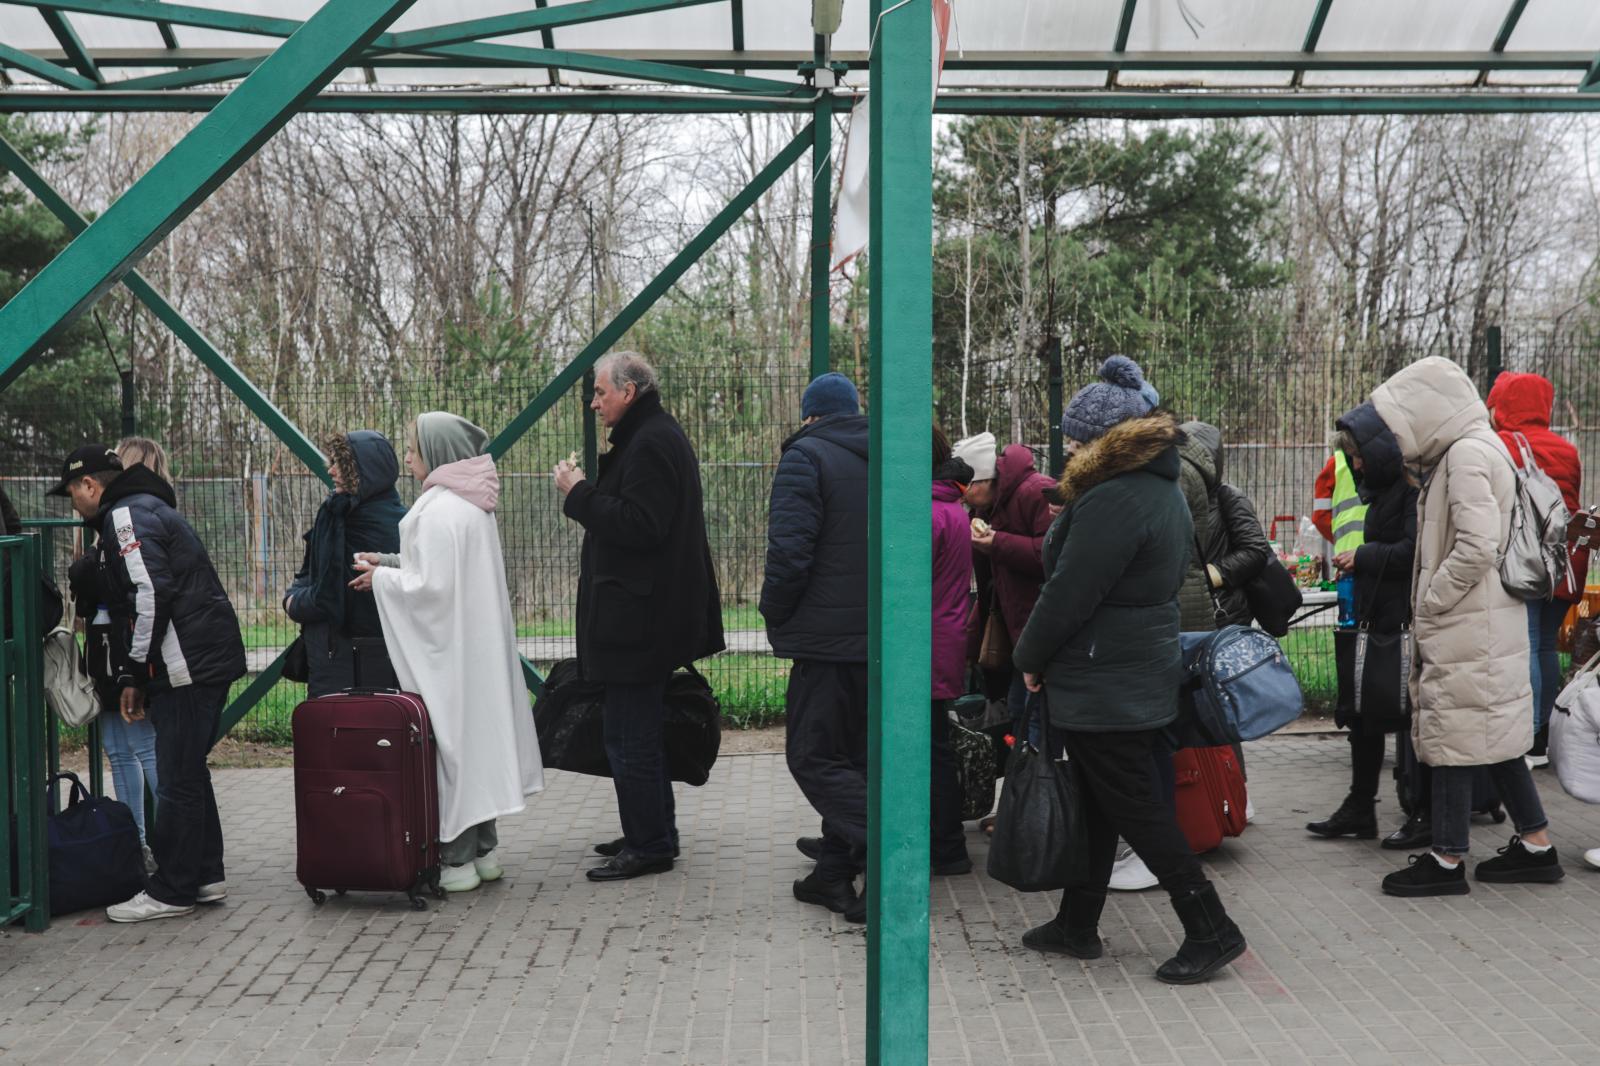 Anadolu/Getty - Russian attacks on Ukraine - Ukranian's refugees leave their loved ones on April 21,...